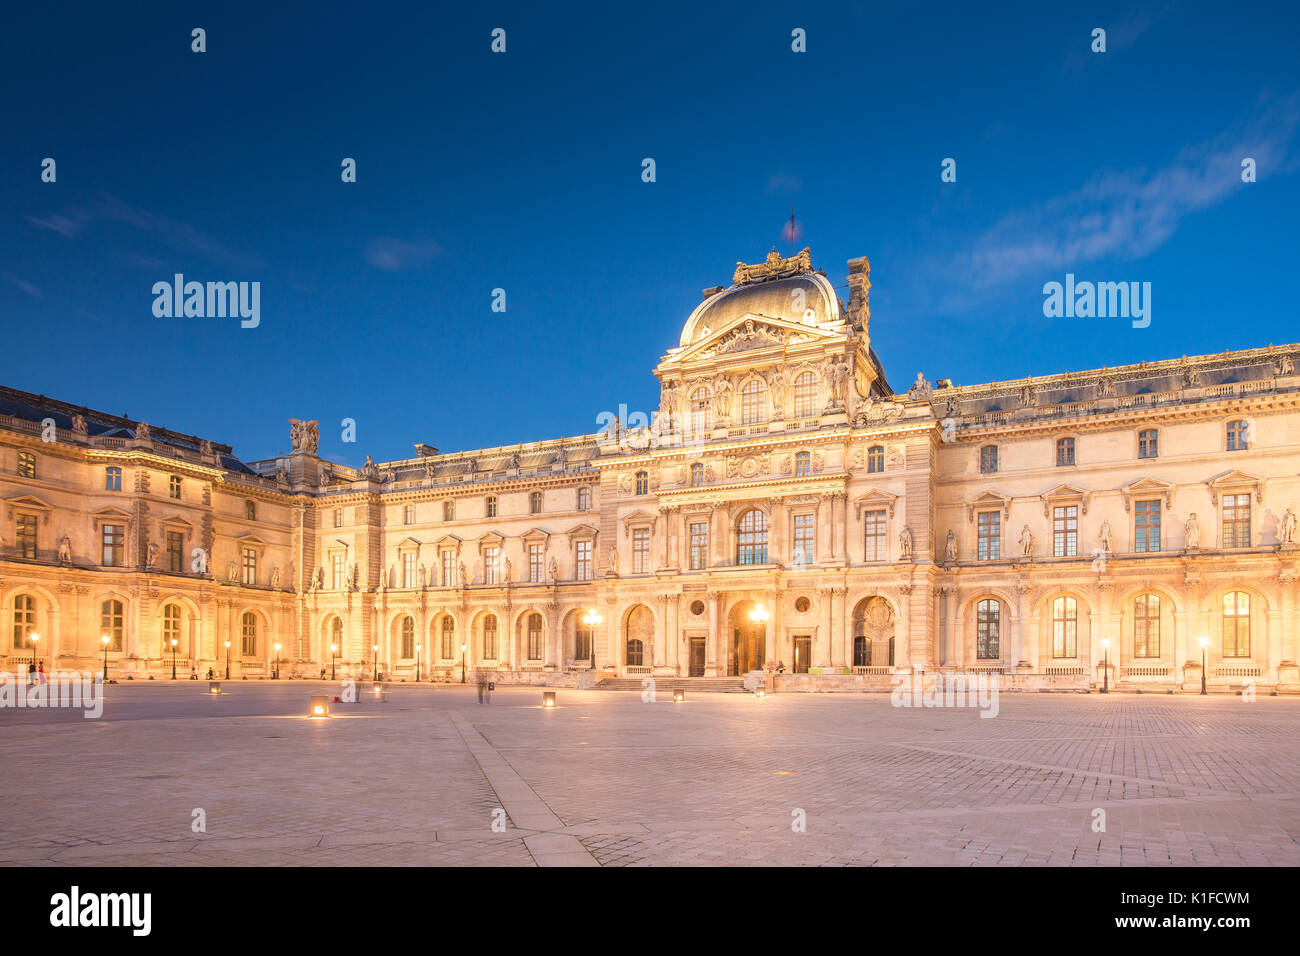 Paris city buildings at night in France. Stock Photo